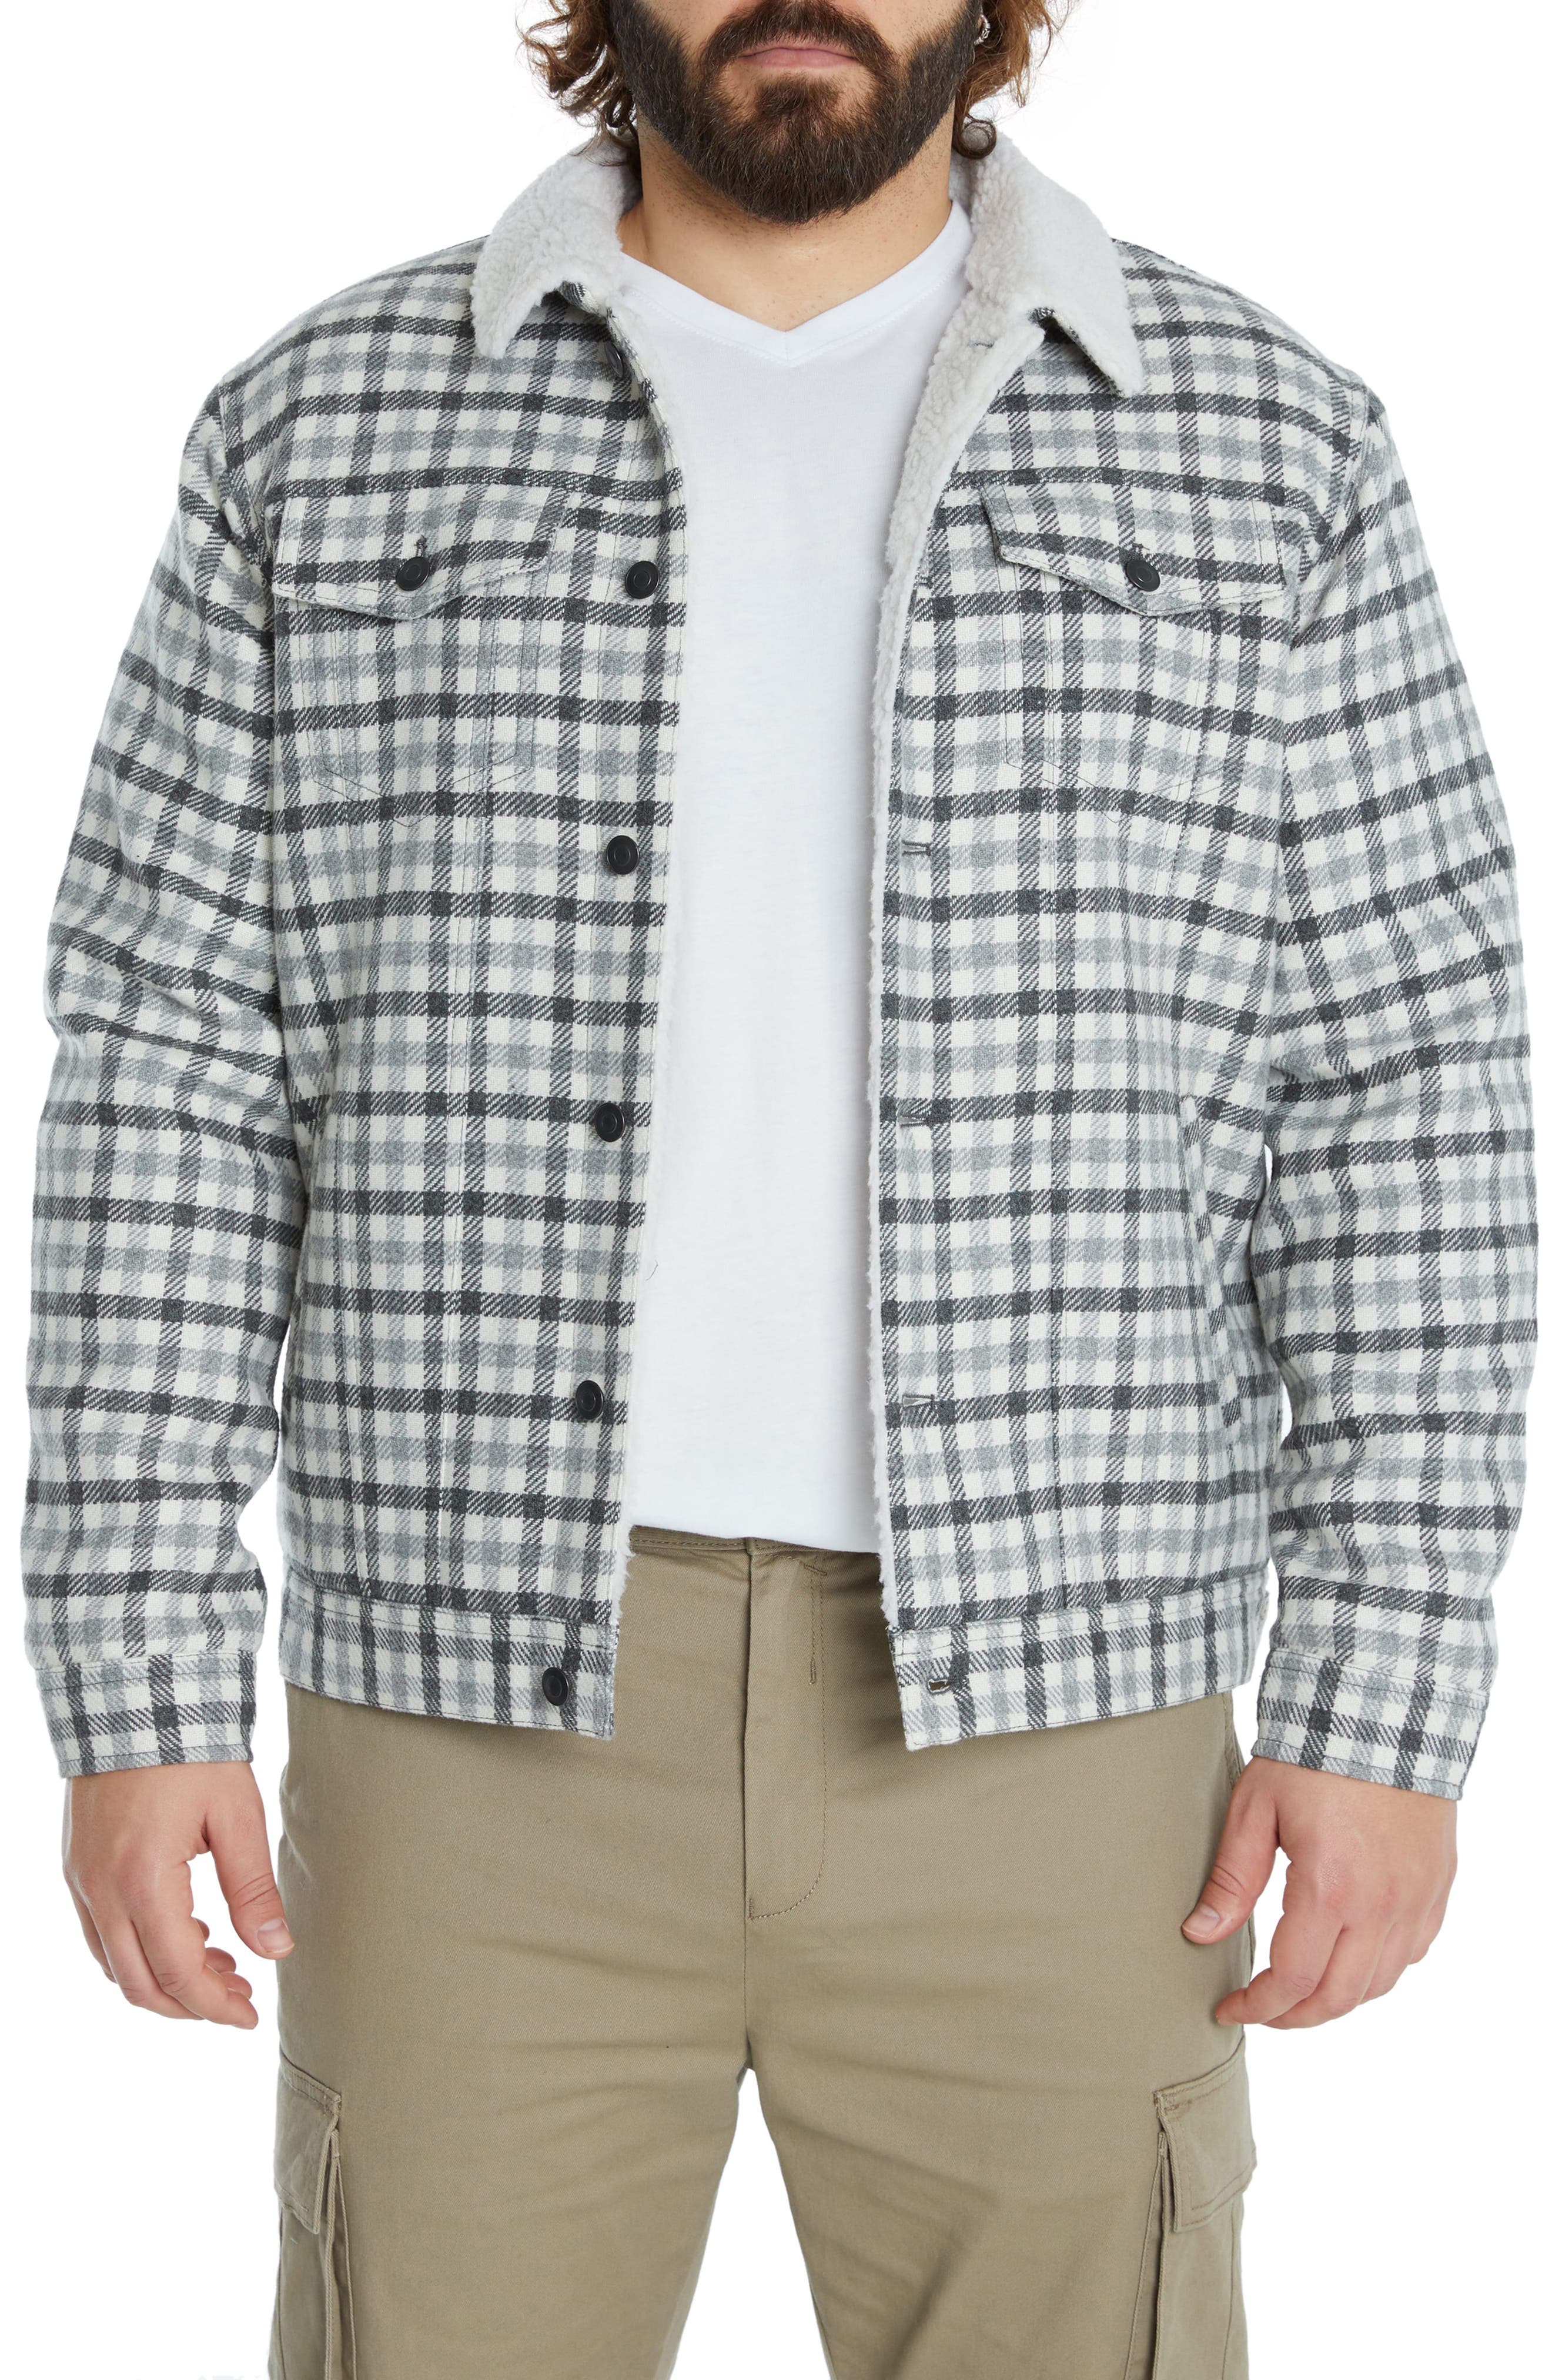 Johnny Bigg Kayce Check Trucker Jacket with Faux Shearling Lining in White